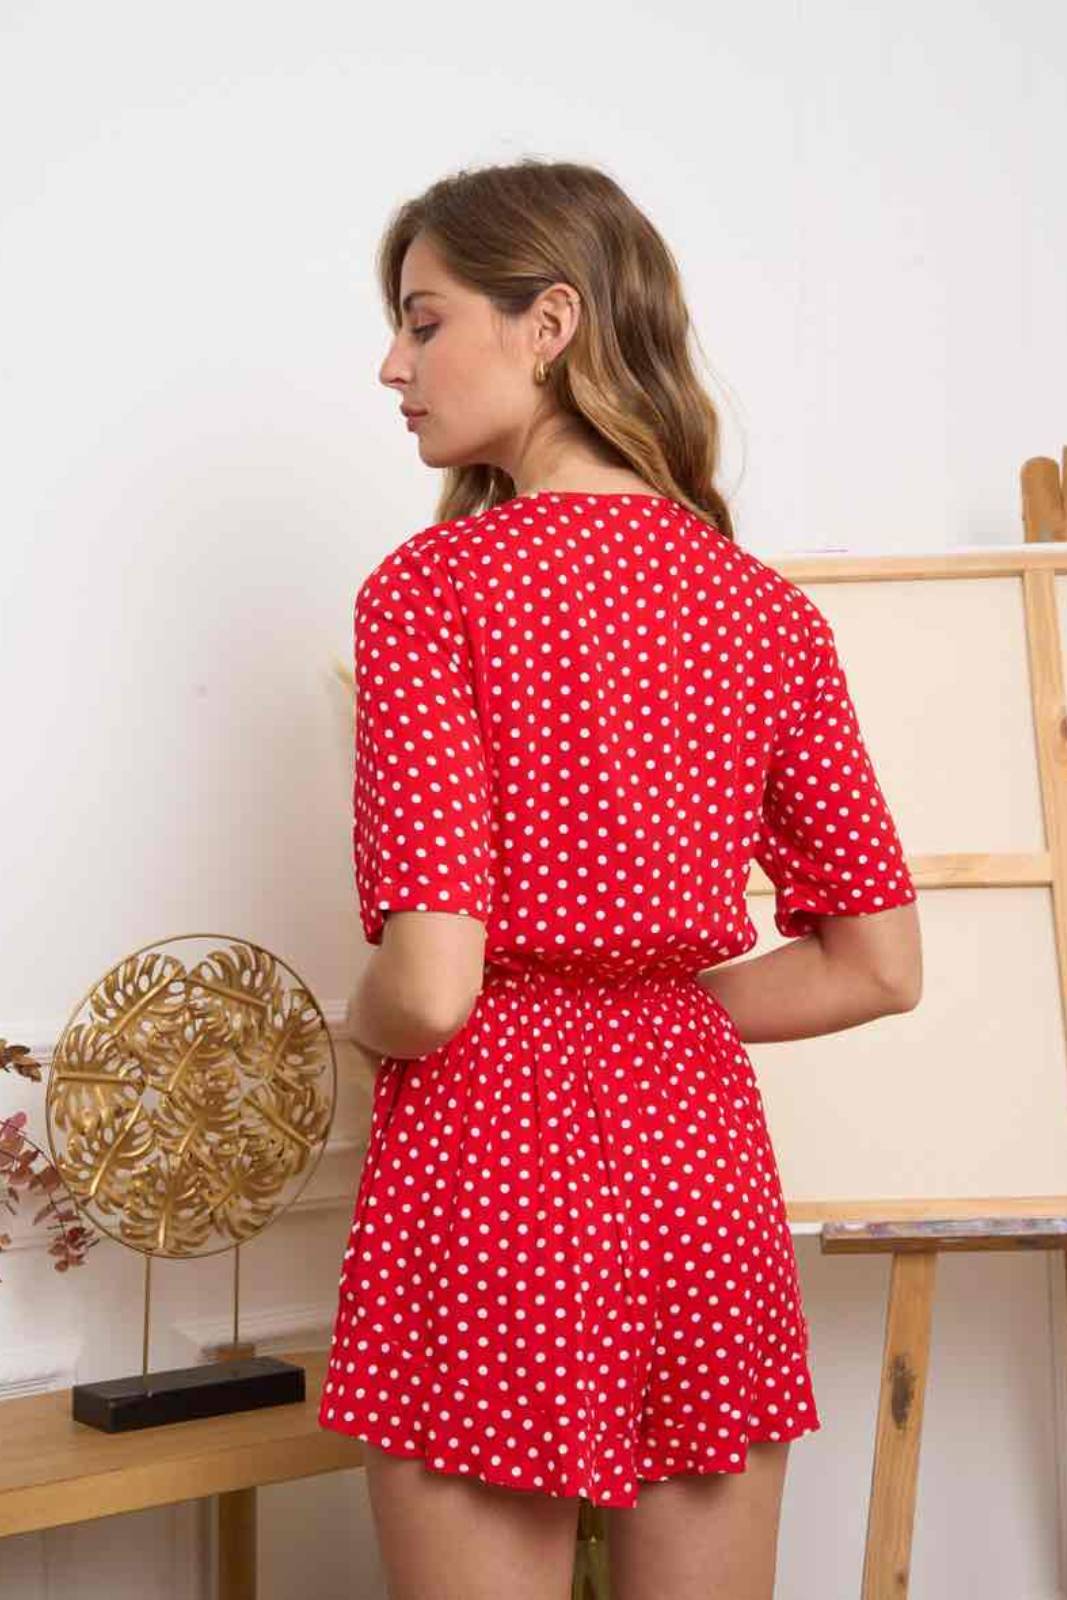 "Dotted polka dots playsuit jumpsuit Alternative Clothing, Dotted Playsuit, Polka Dots, Rockabilly Style, Punk Fashion."